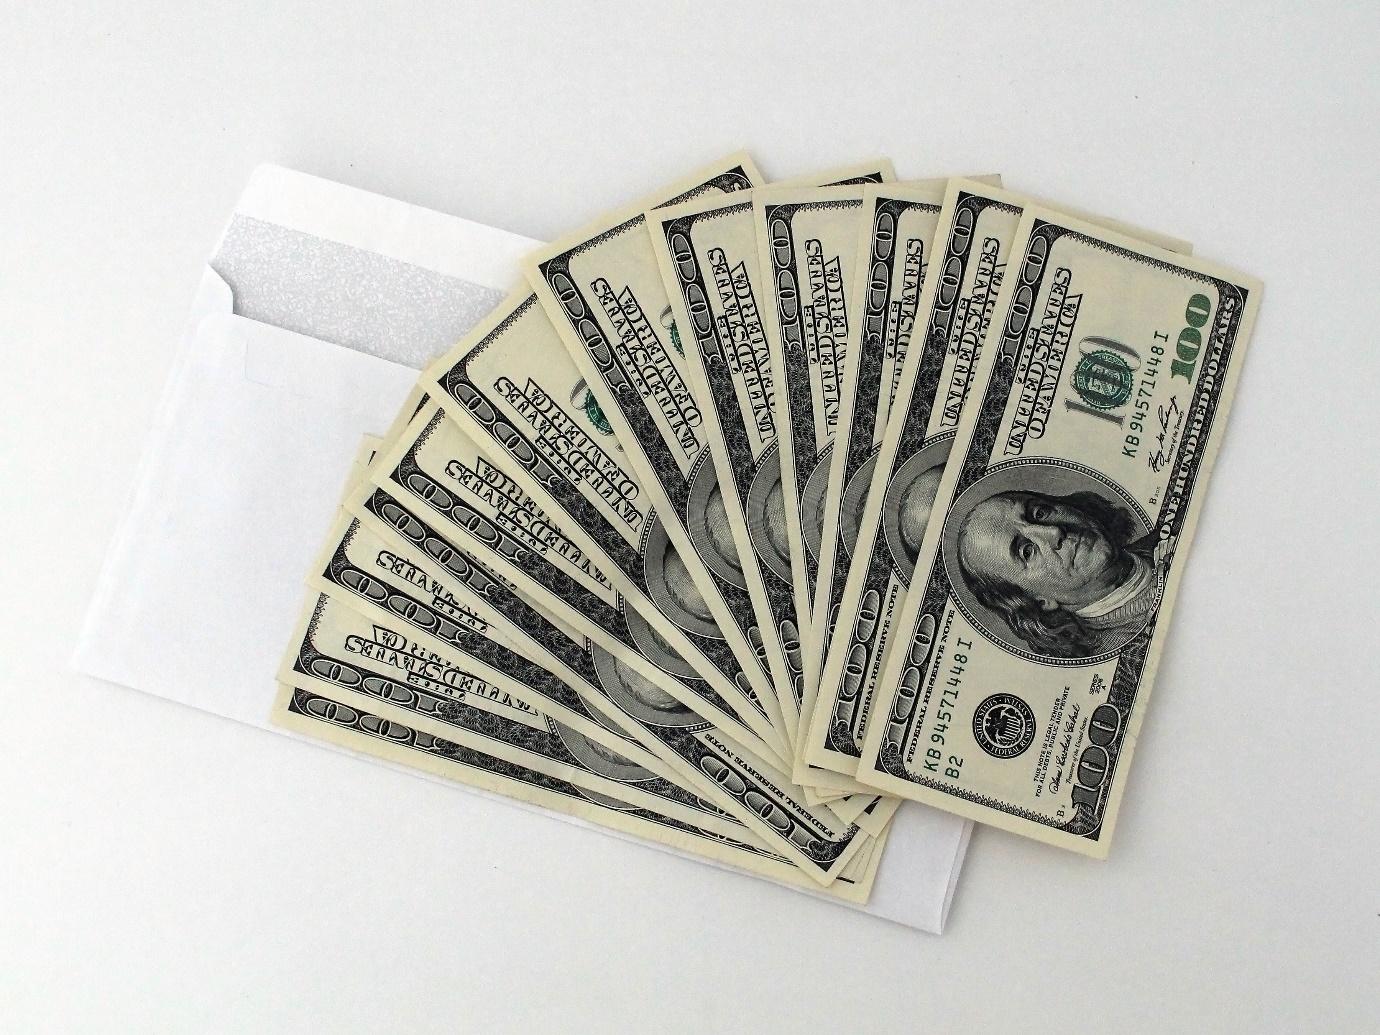 A stack of paper money

Description automatically generated with medium confidence